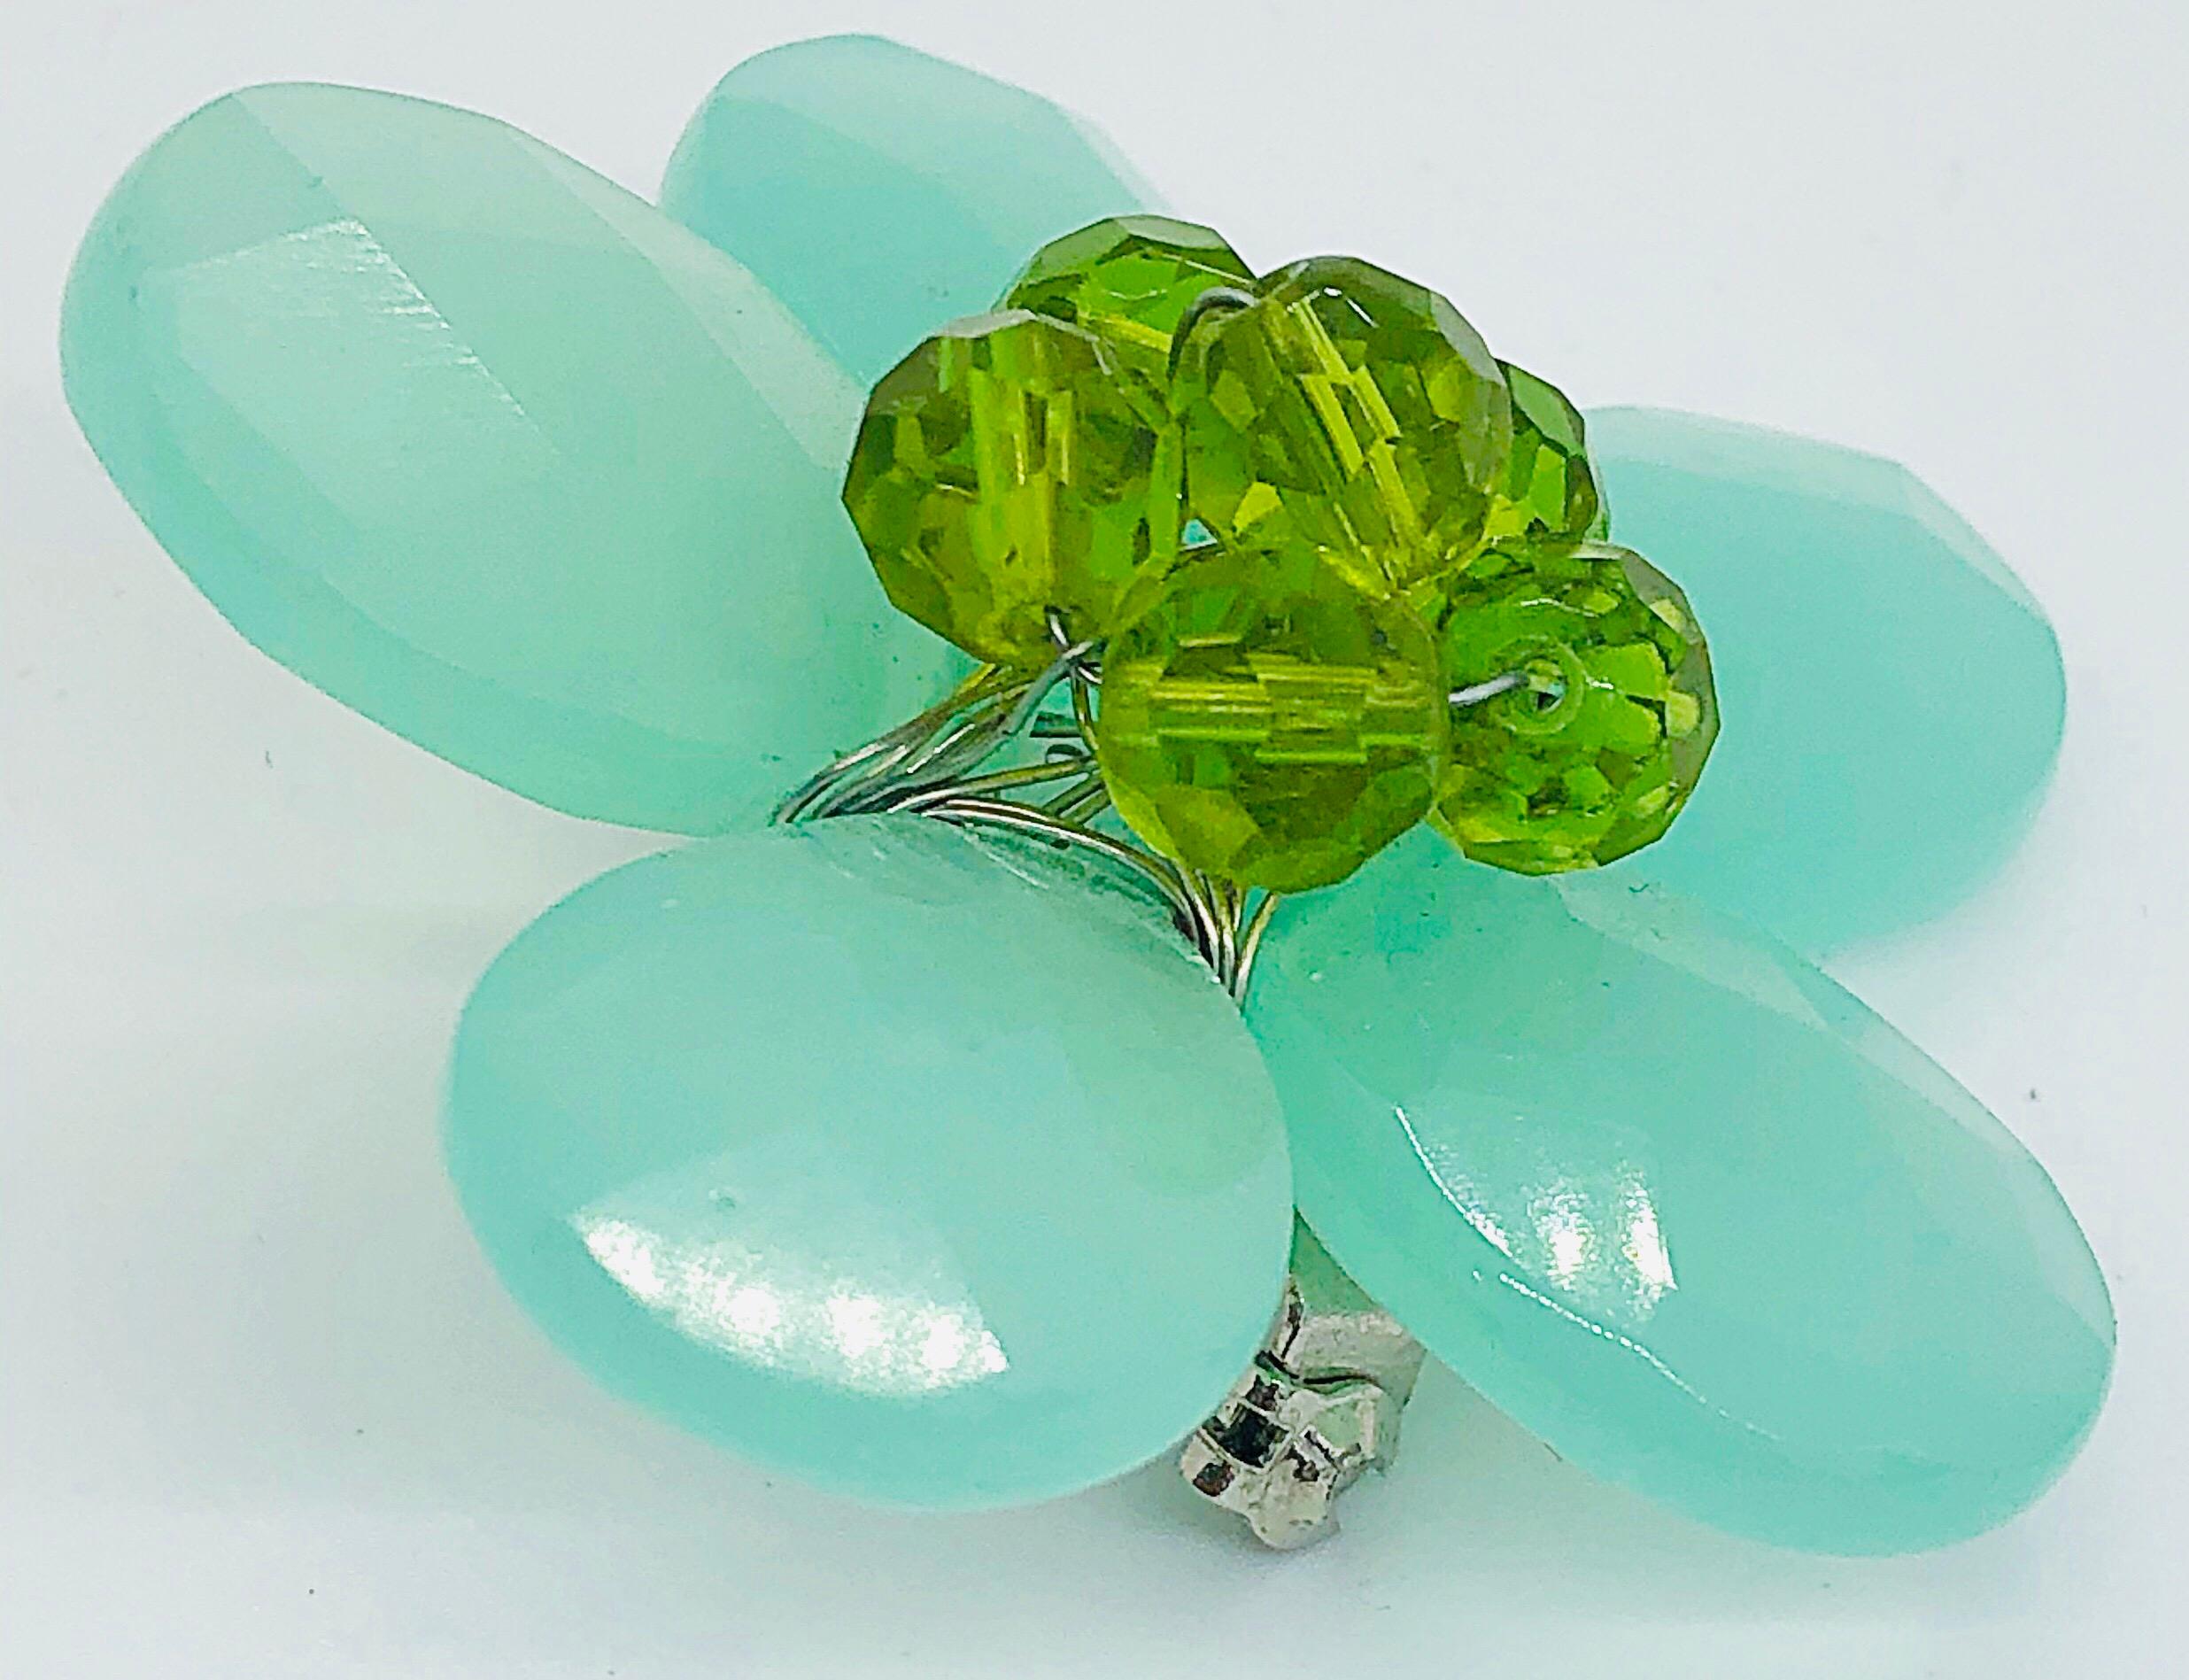 Chic 1960s mint and lime beaded lucite flower brooch pin ! Features mint green petals with lime green beads in the center. Can really make an outfit. Perfect on a denim jean jacket, blazer, cardigan, or dress. 
In great condition
Measurements:
2.25